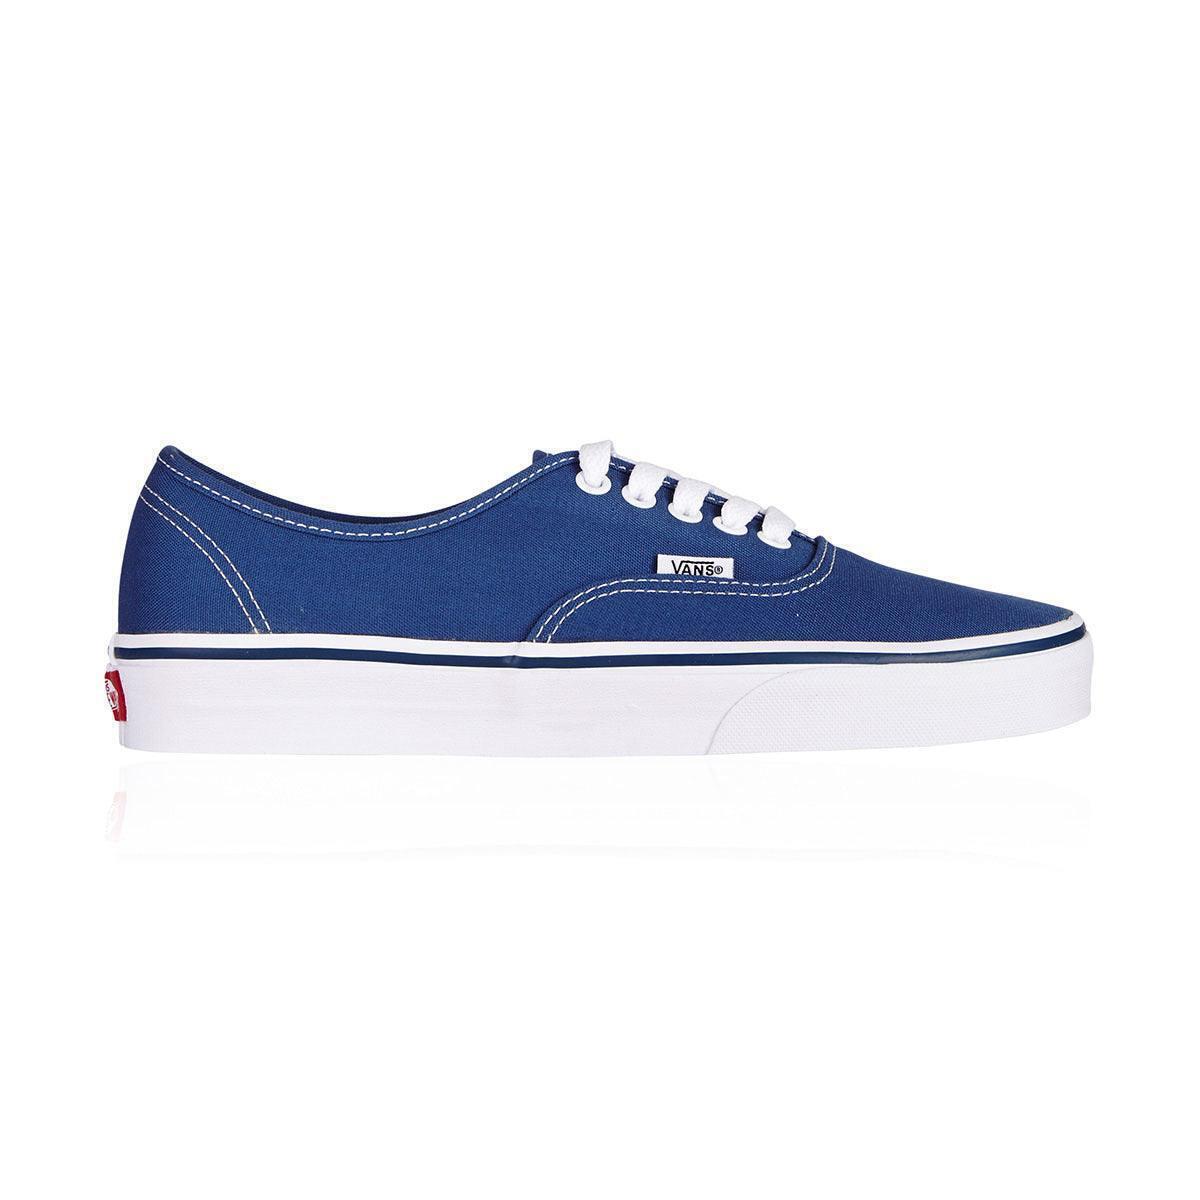 Vans - Authentic Casual Shoes Casual Shoes - Mens US 3.5/Womens US 5 - Navy